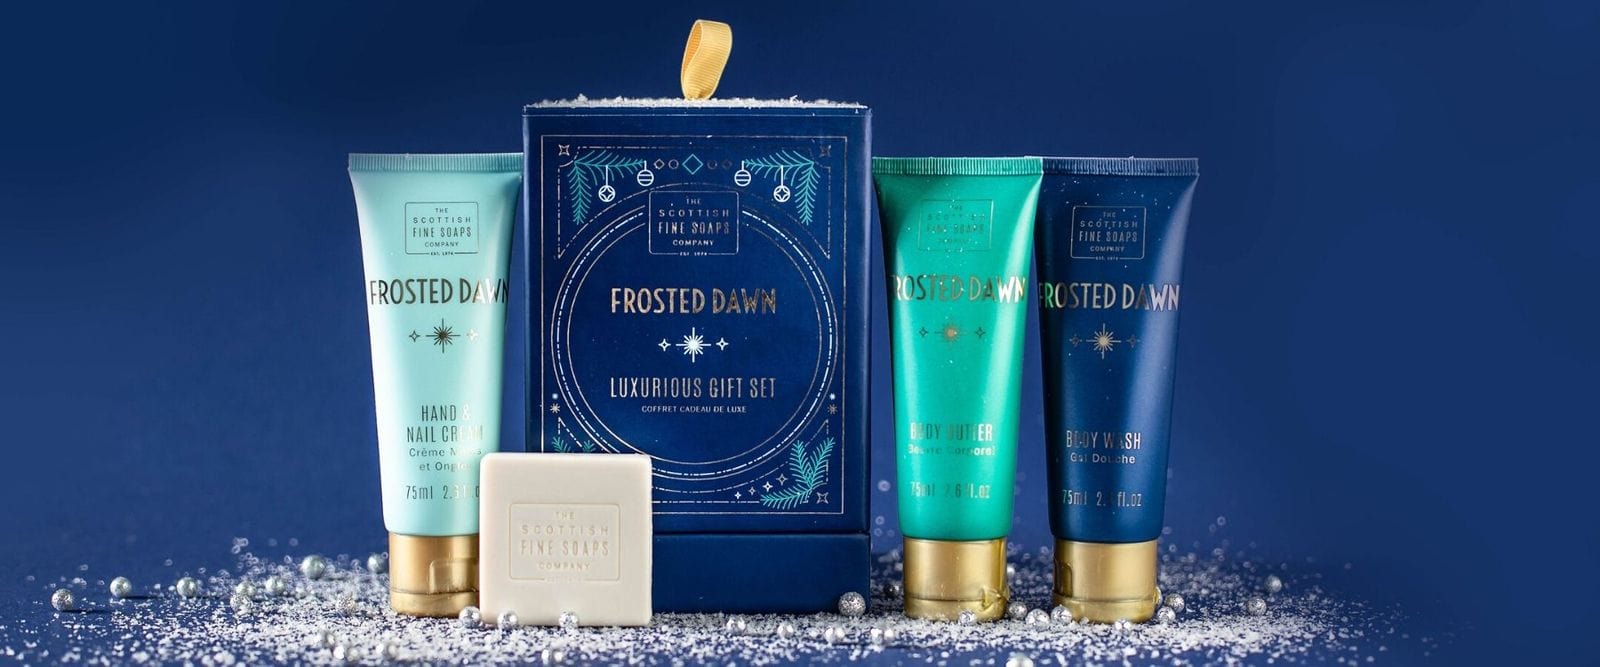 Frosted Dawn Luxurious Gift Set